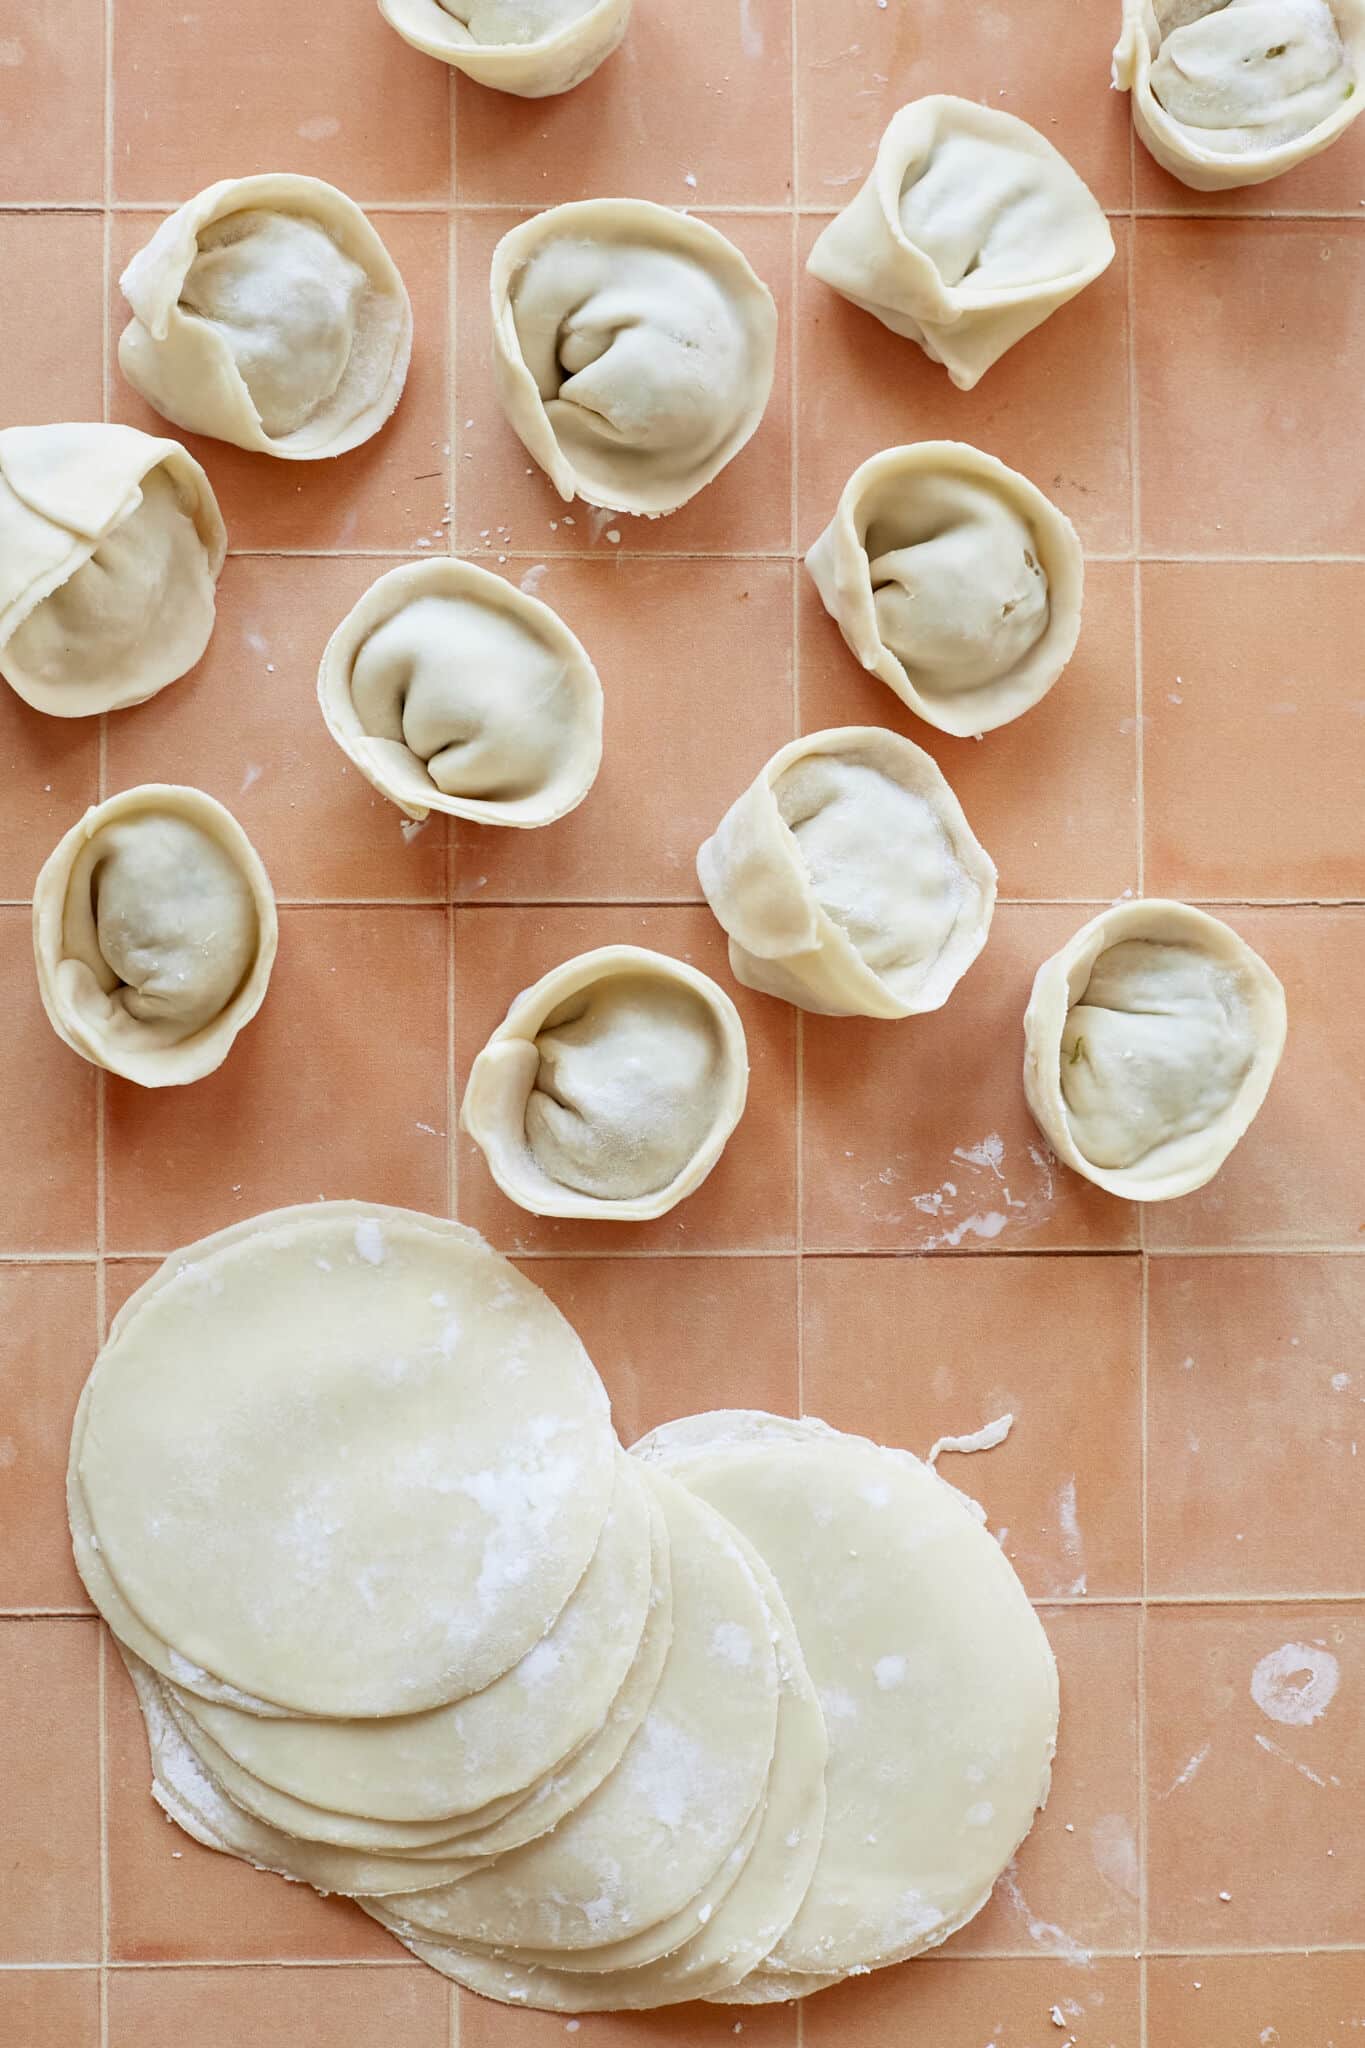 Thin, delicate Homemade Dumpling Wrappers with some dumplings.